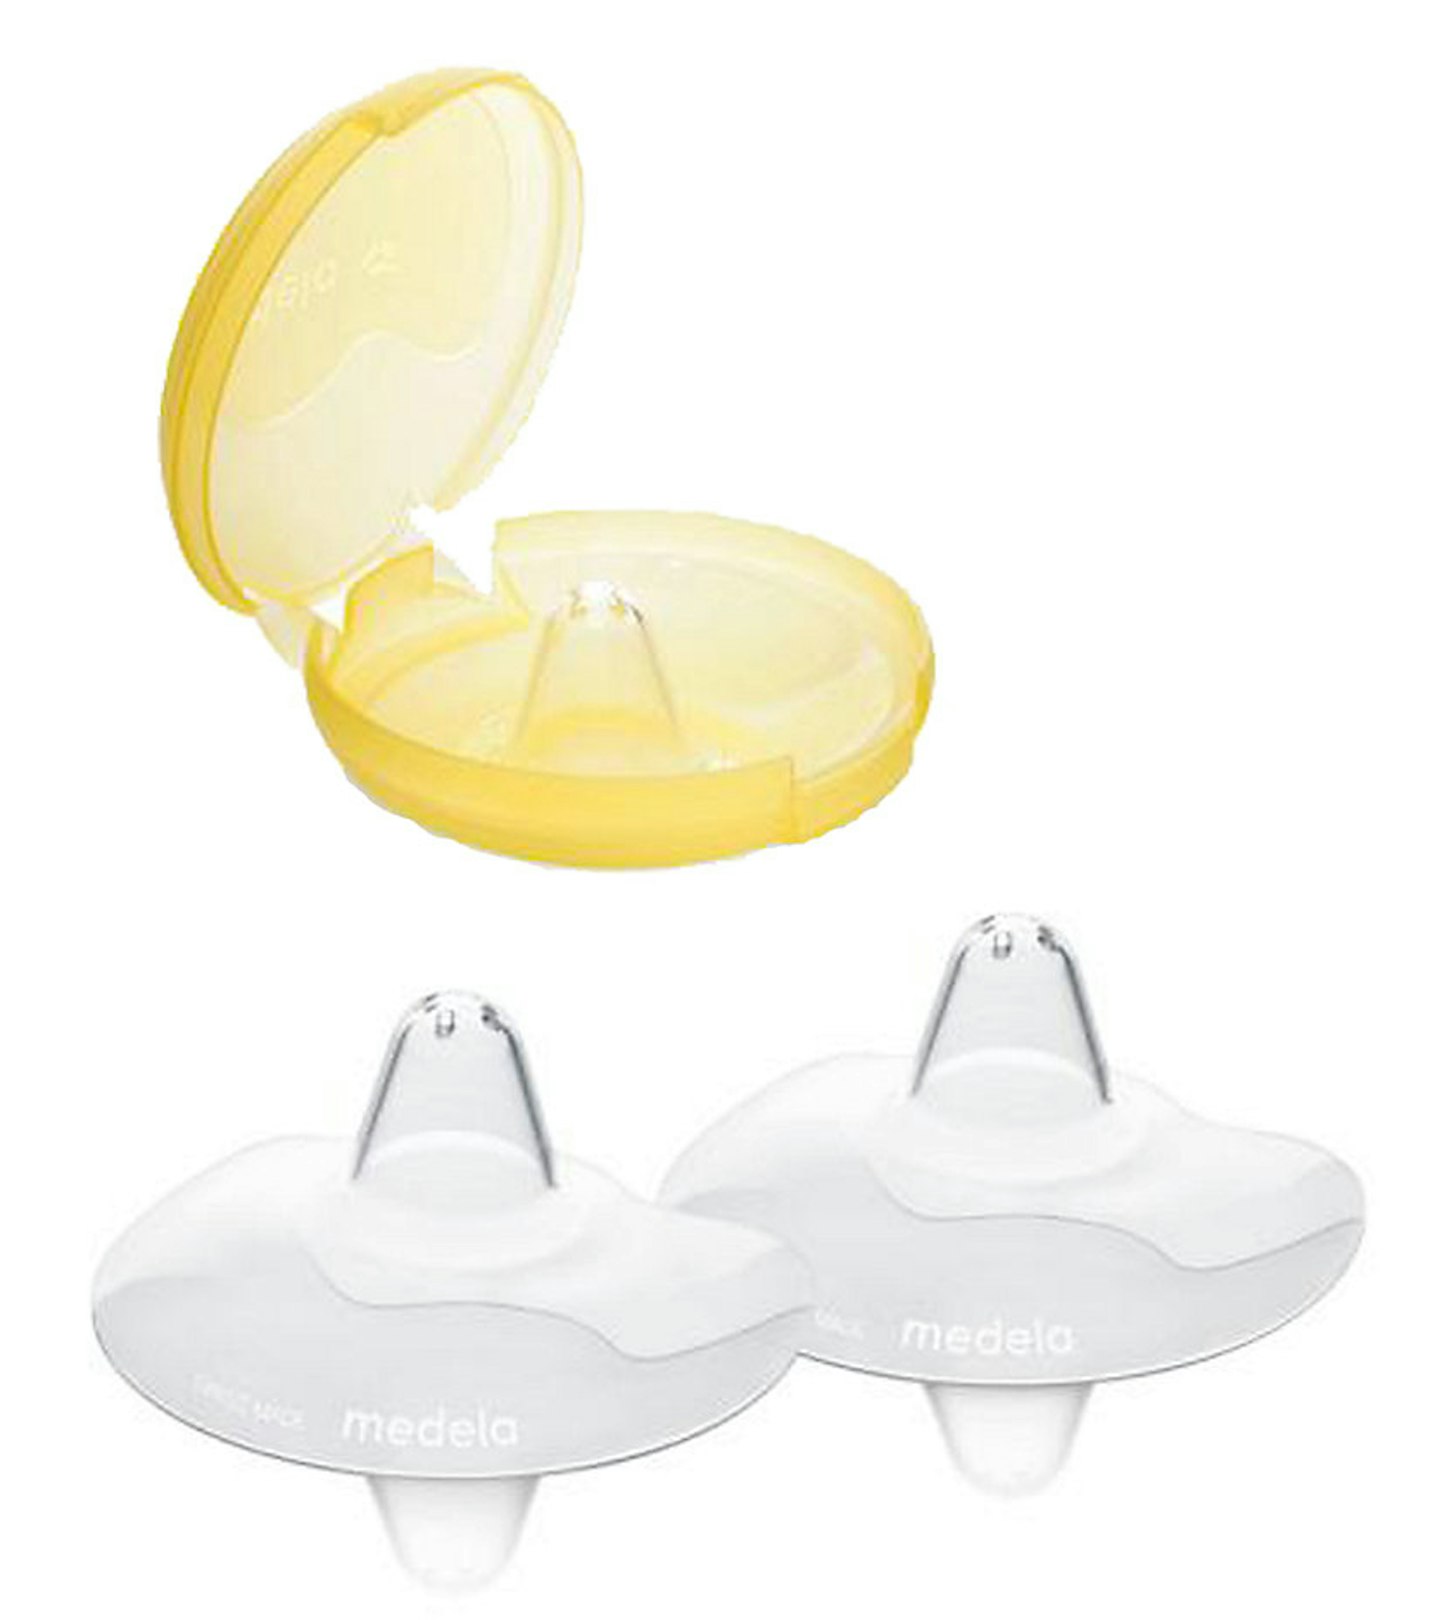 Medela contact nipple shields with case - 2 pack, u00a38.99